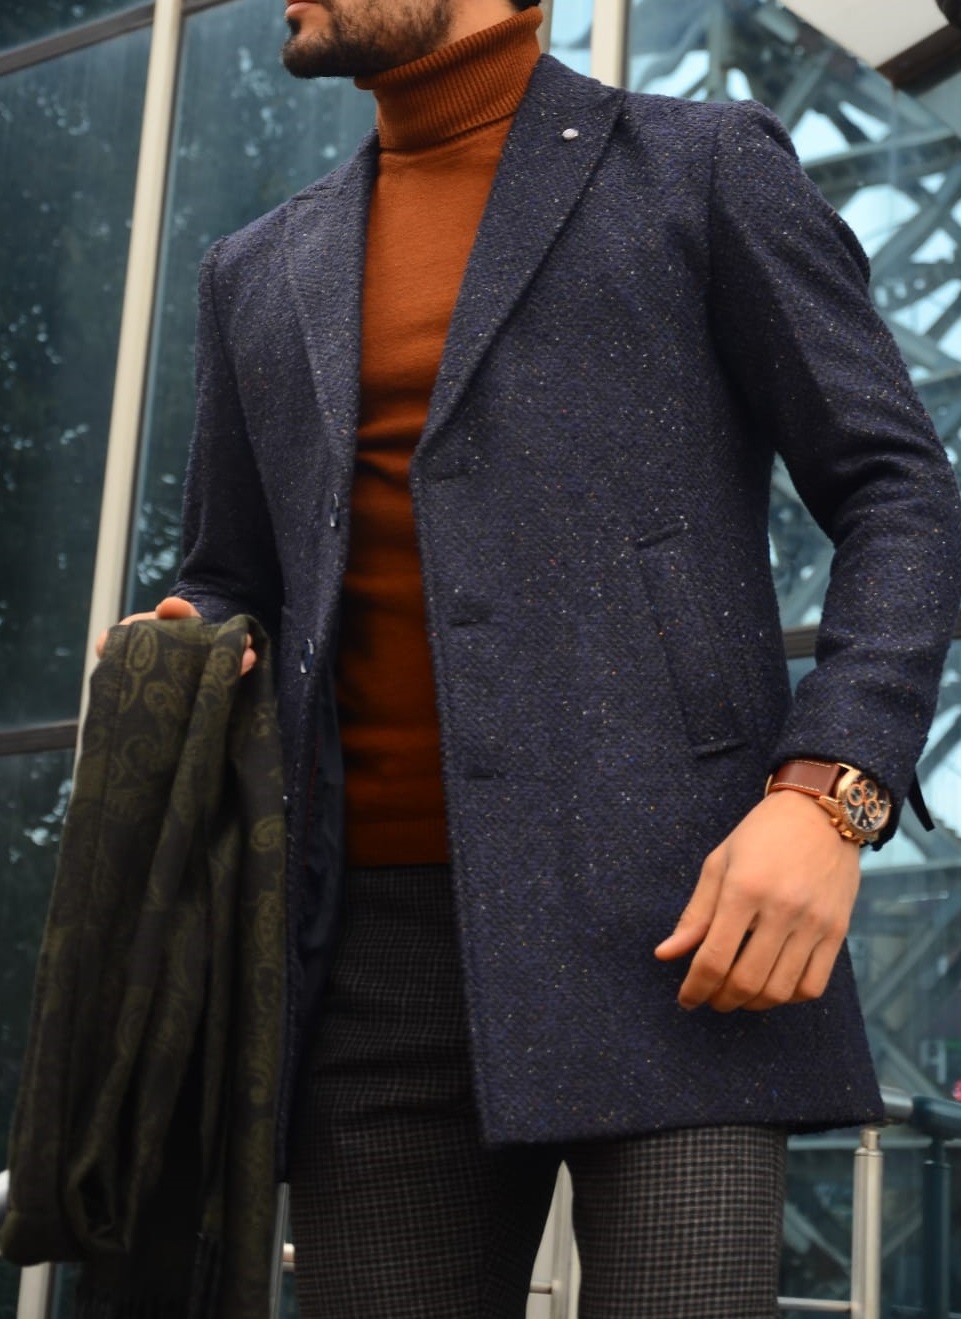 Buy Navy Blue Slim Fit Woolen Coat by Gentwith.com with Free Shipping